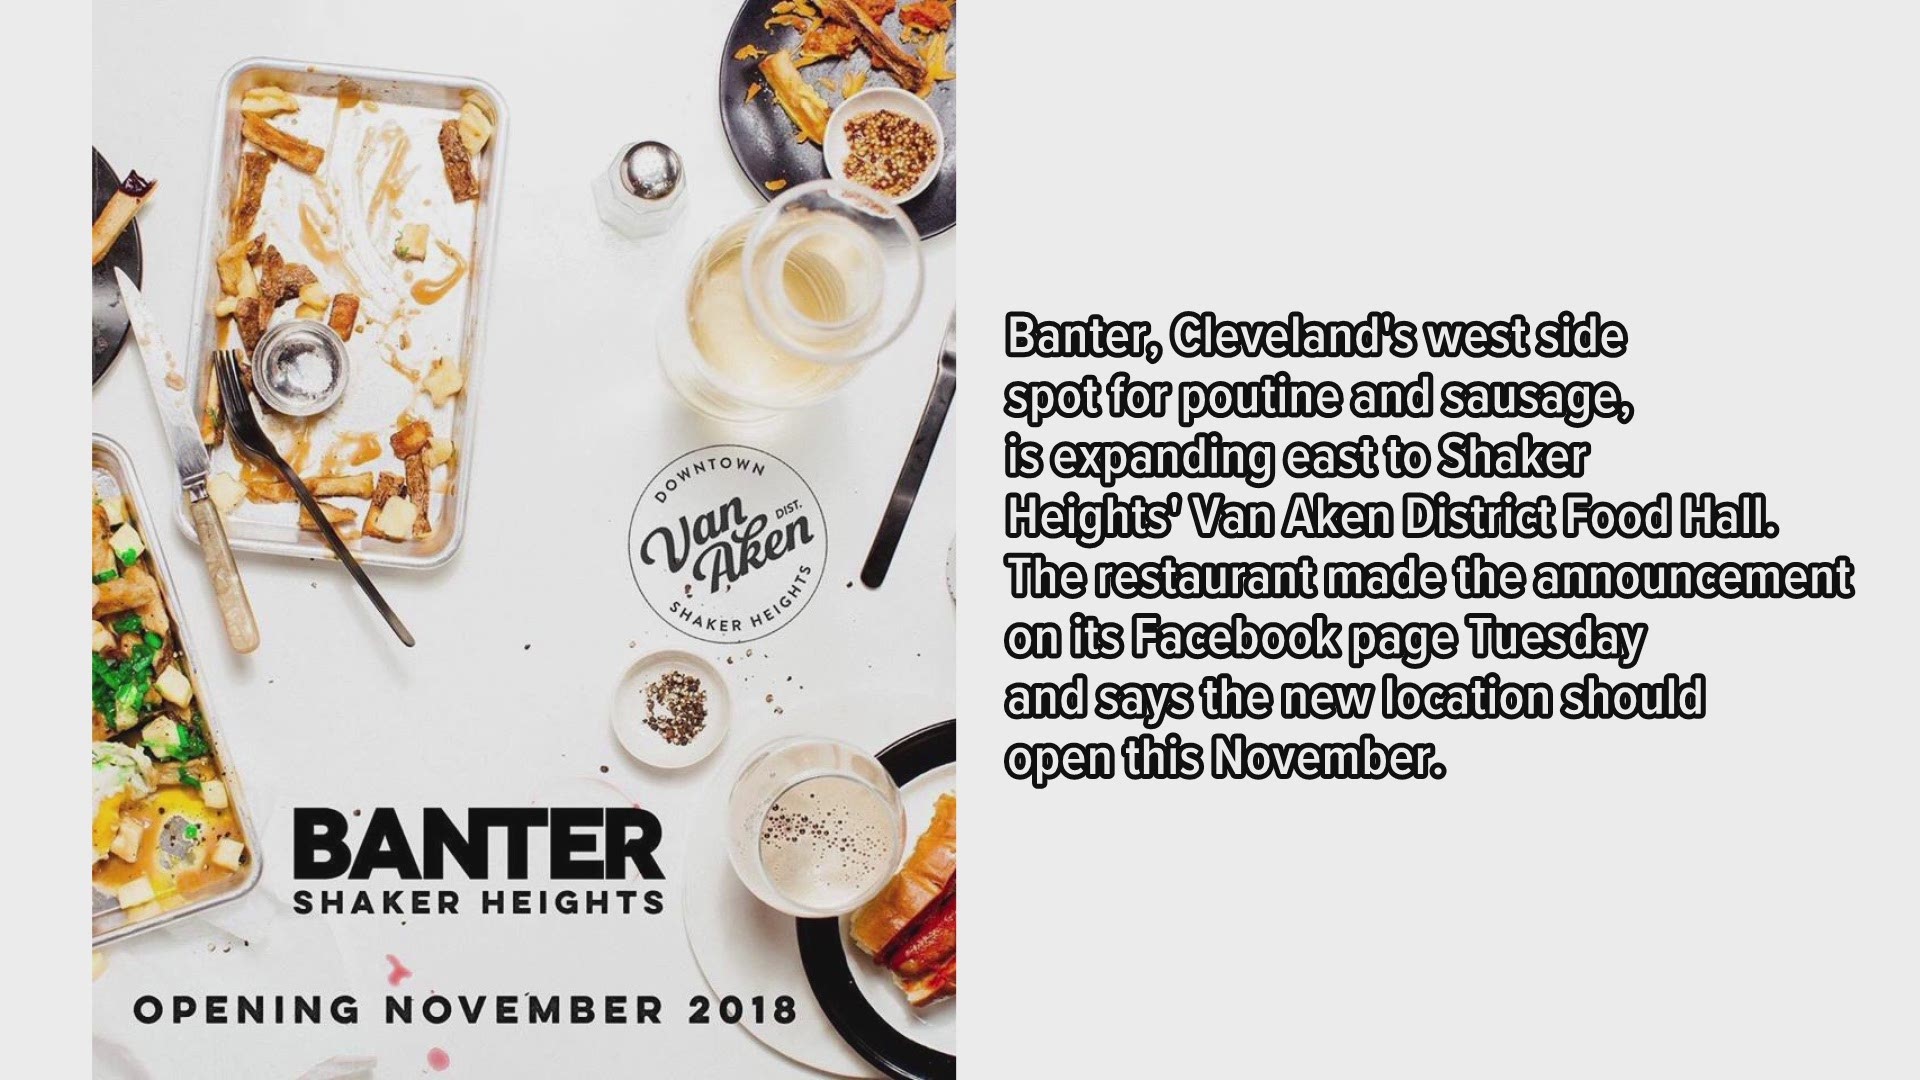 Banter announces Shaker Heights location to open in November 2018